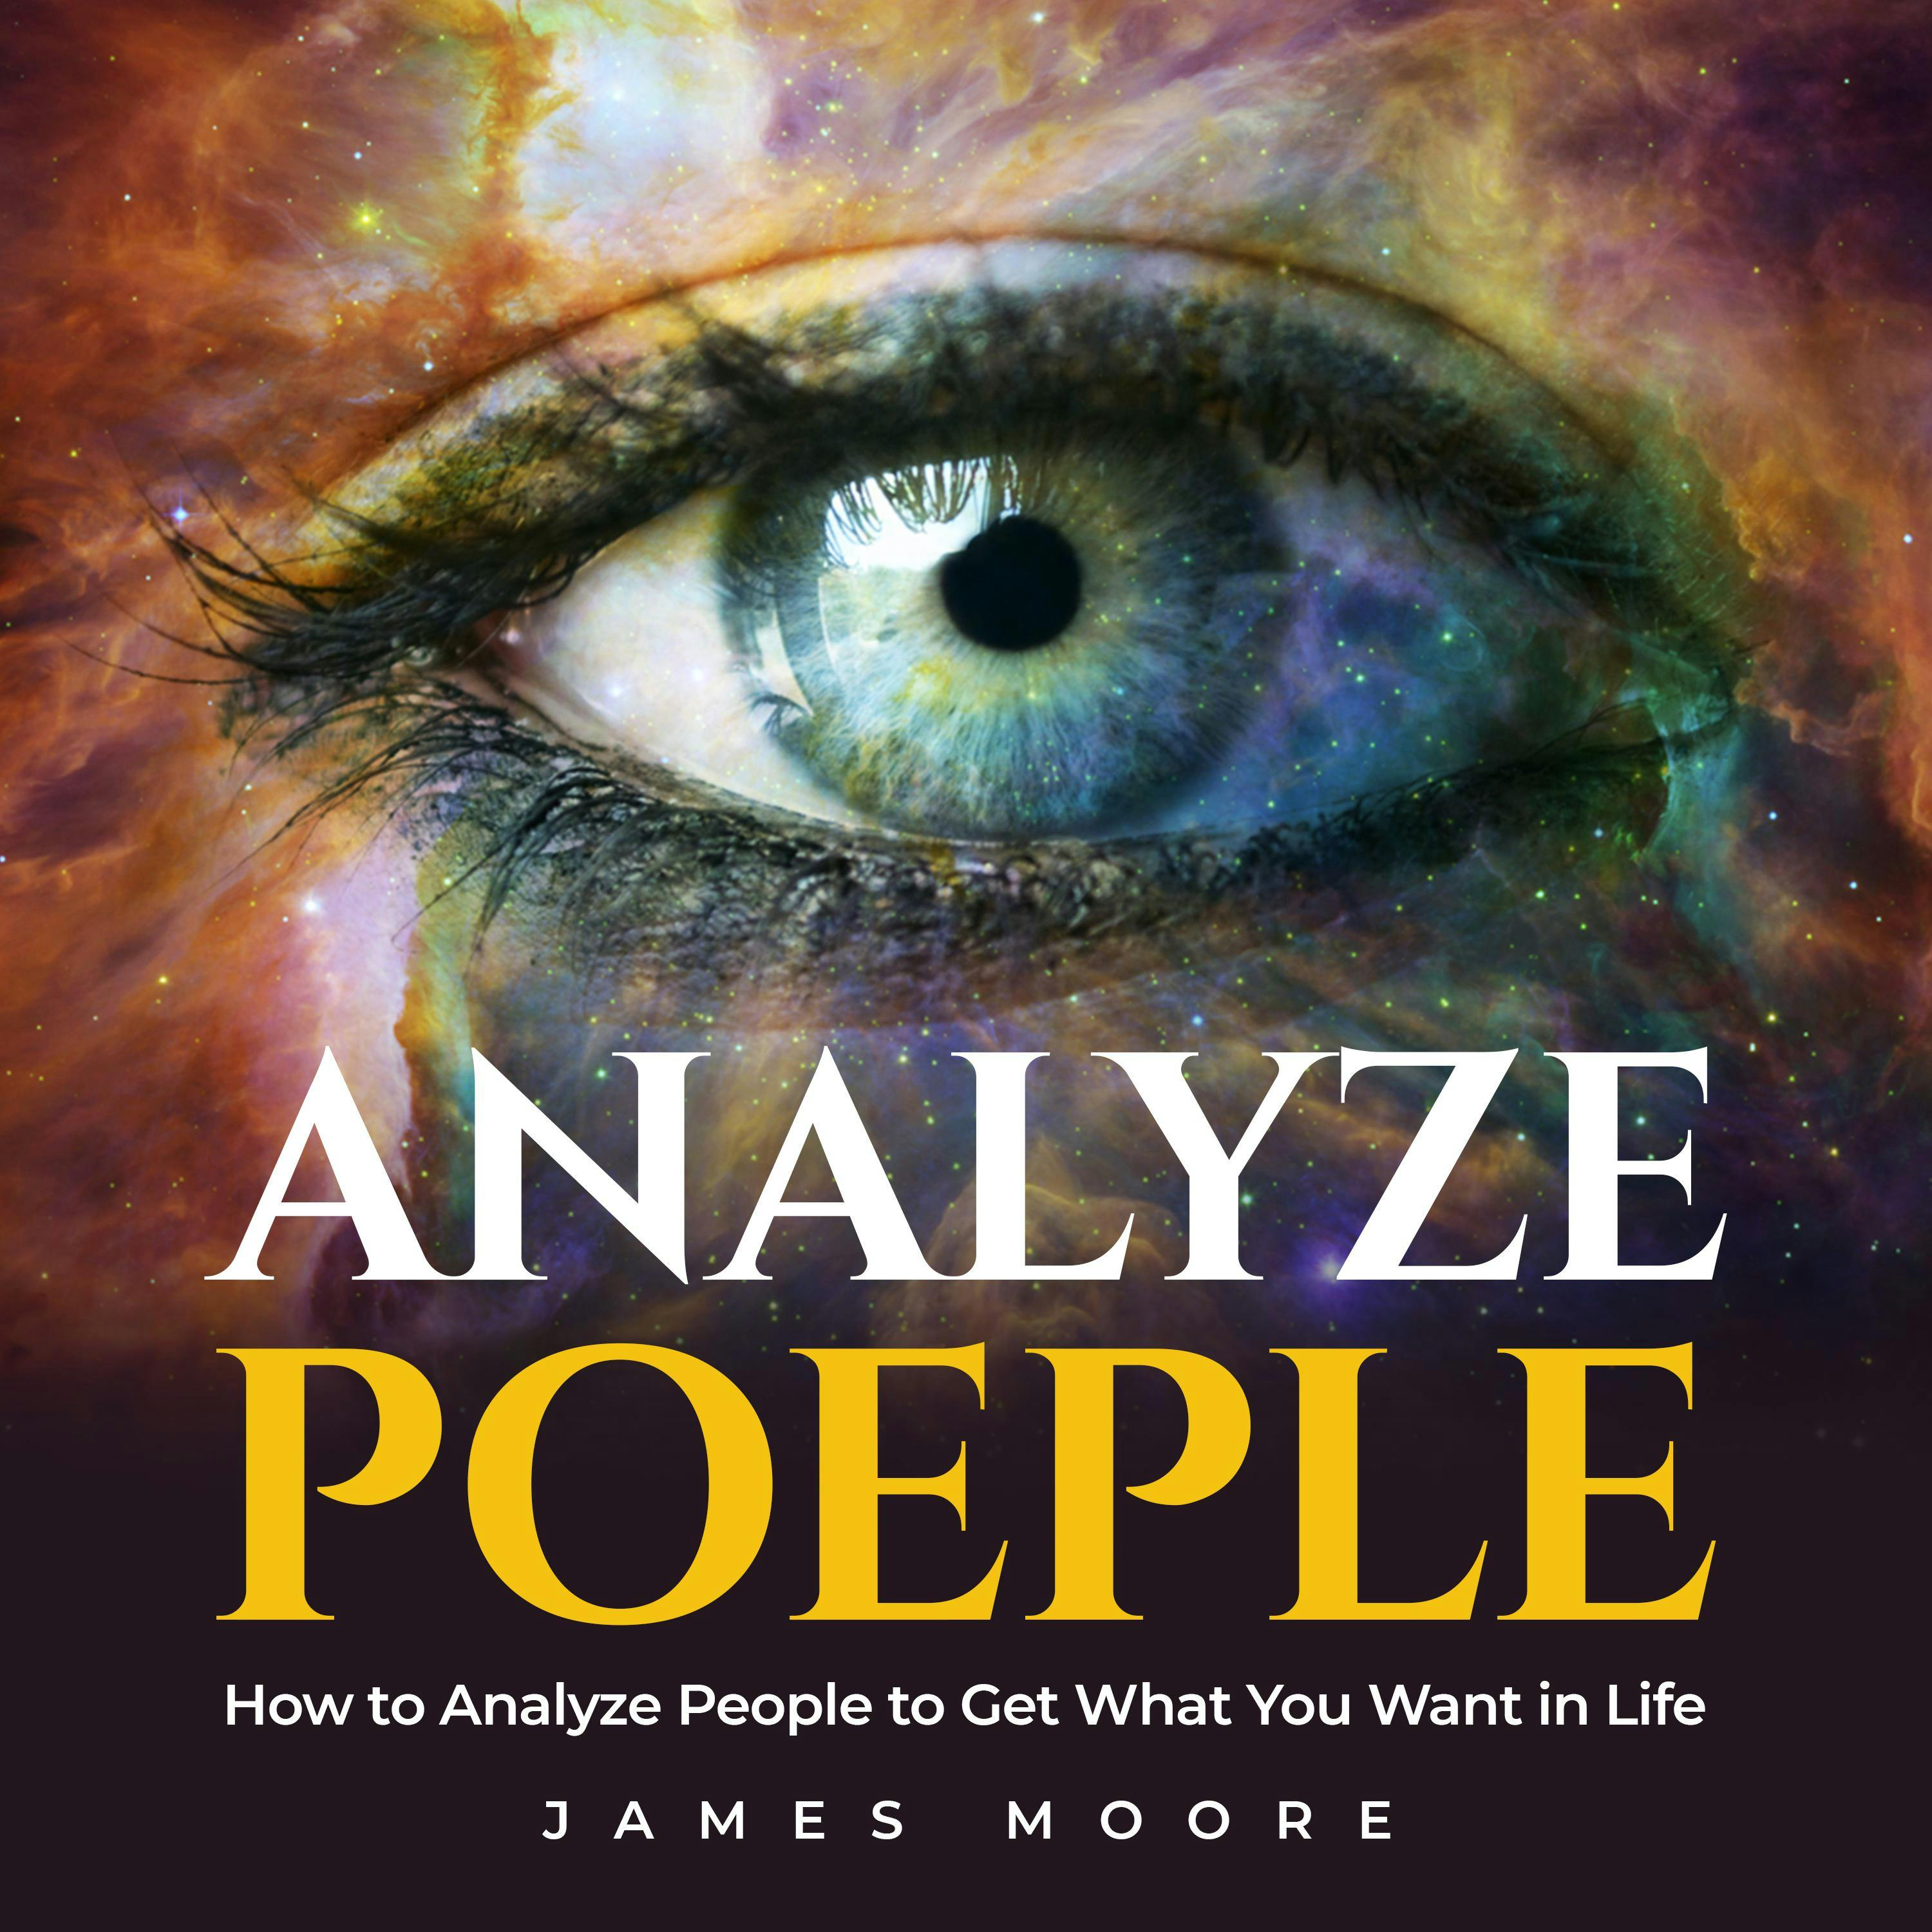 Analyze People: How to Analyze People to Get What You Want in Life - James Moore